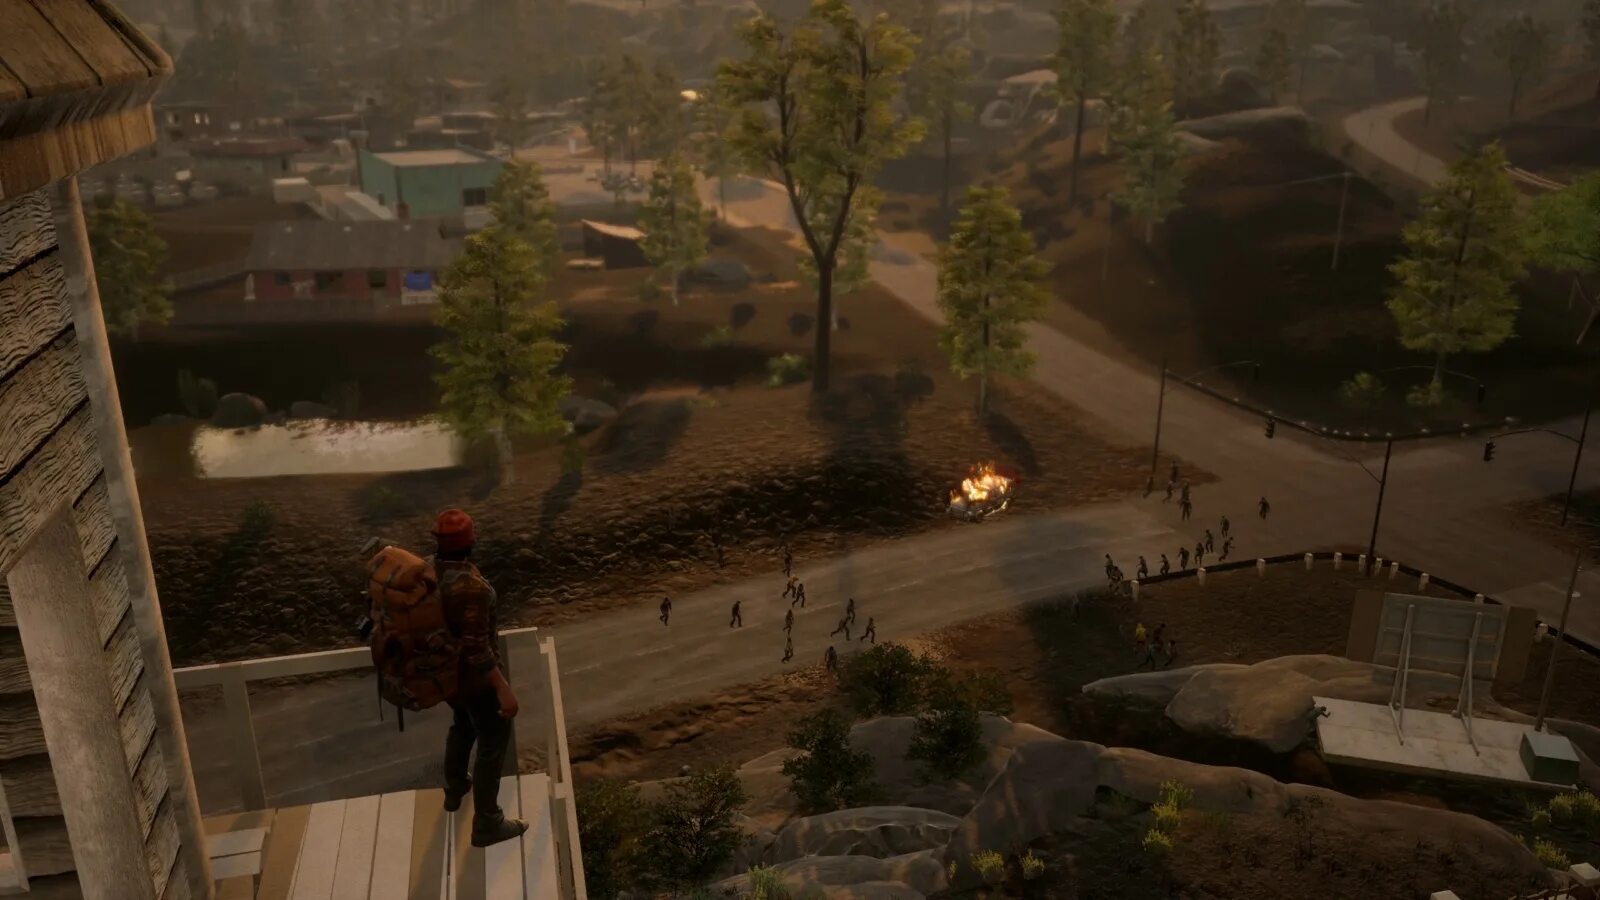 Каскад Хиллс State of Decay 2. State of Decay 2 Cascade Hills. State of Decay 2 базы. Прохождение state